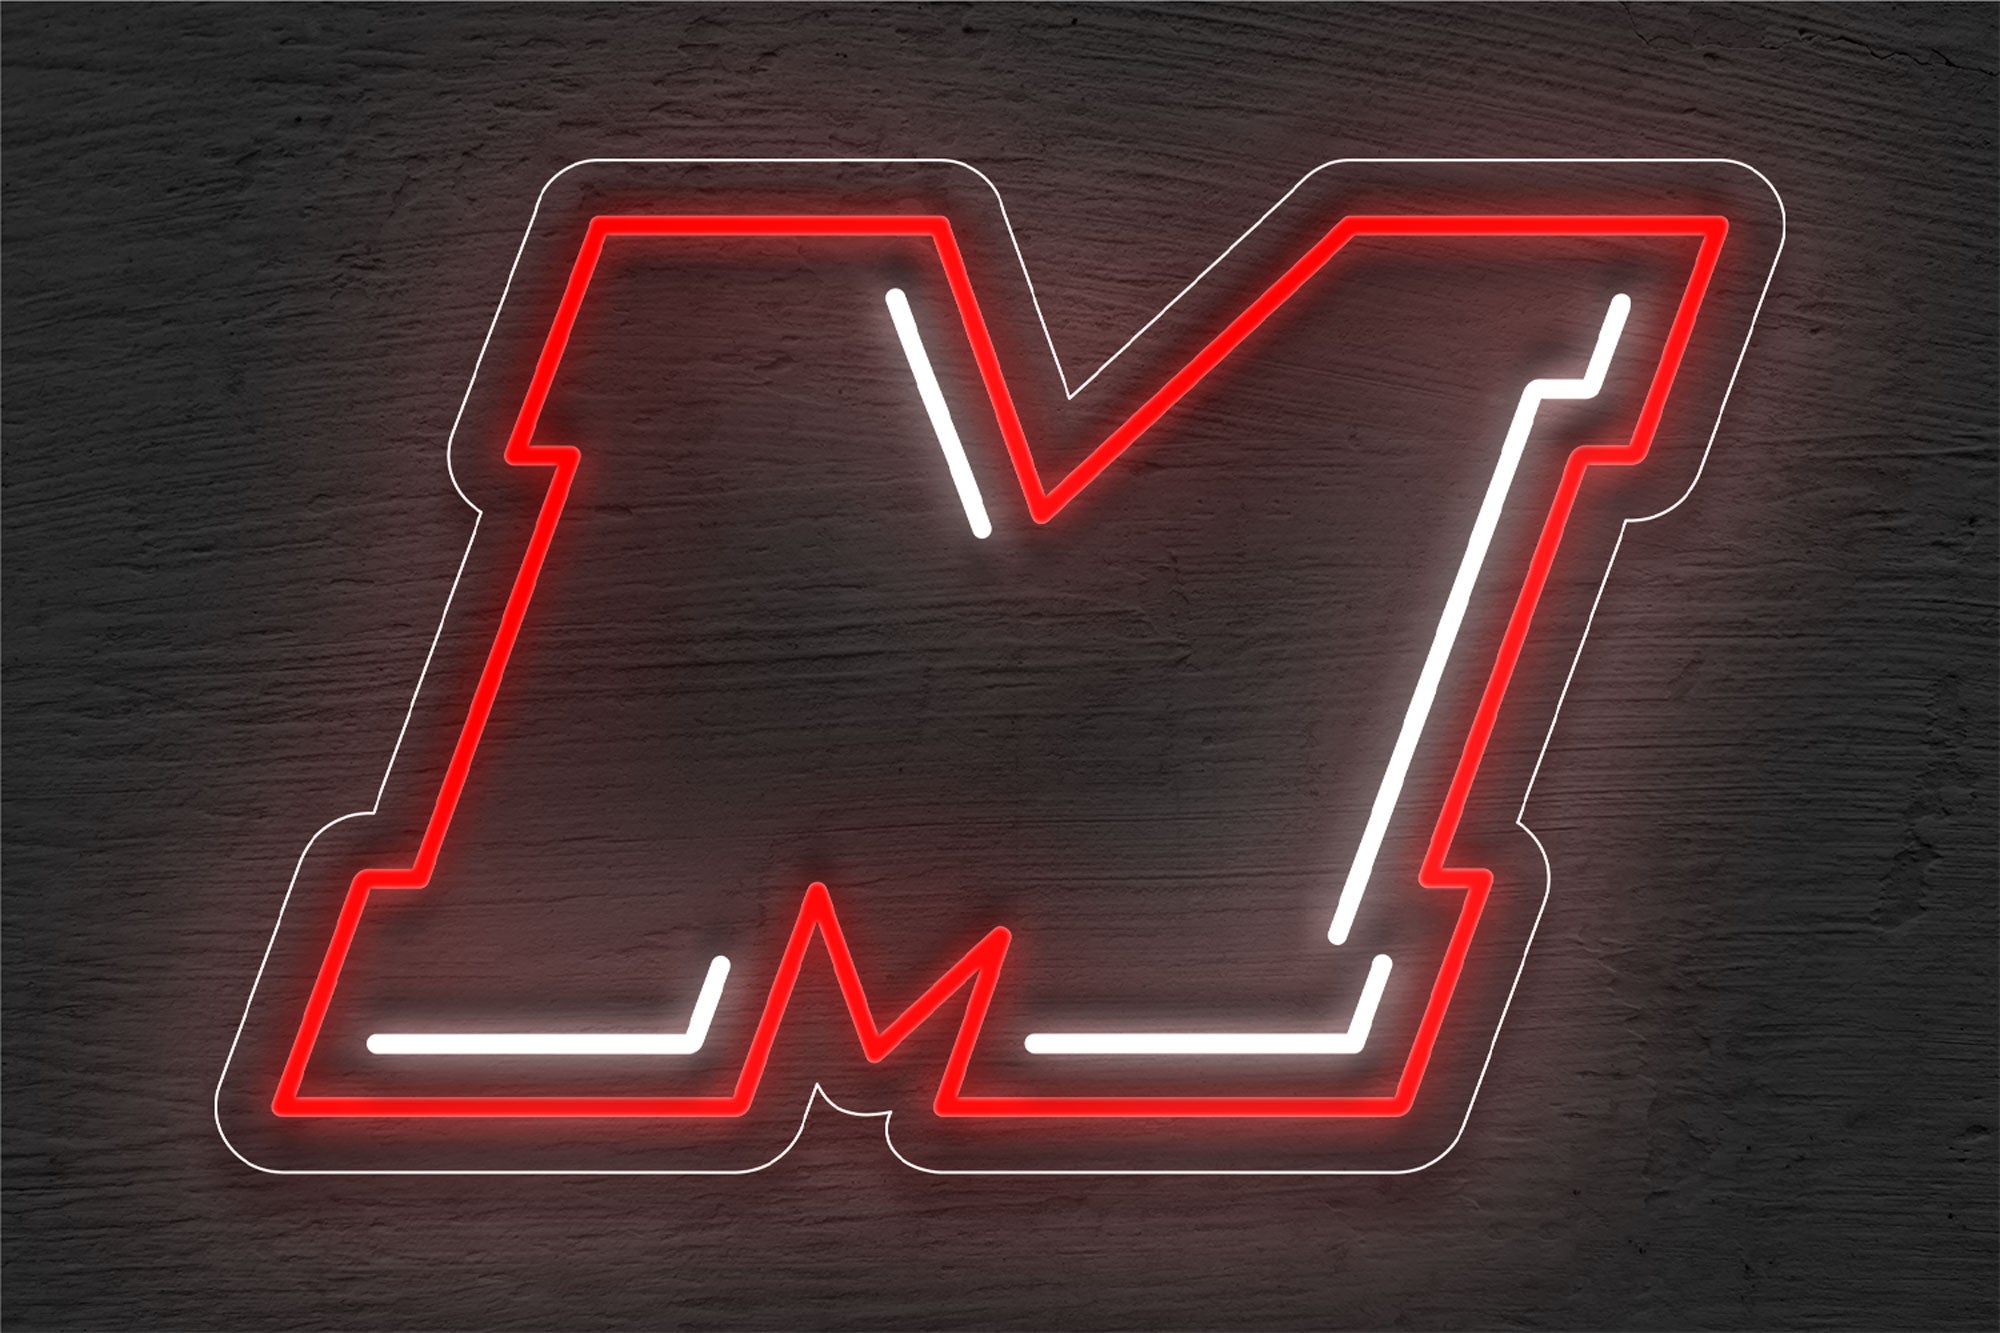 Marist Red Foxes Men's Basketball LED Neon Sign